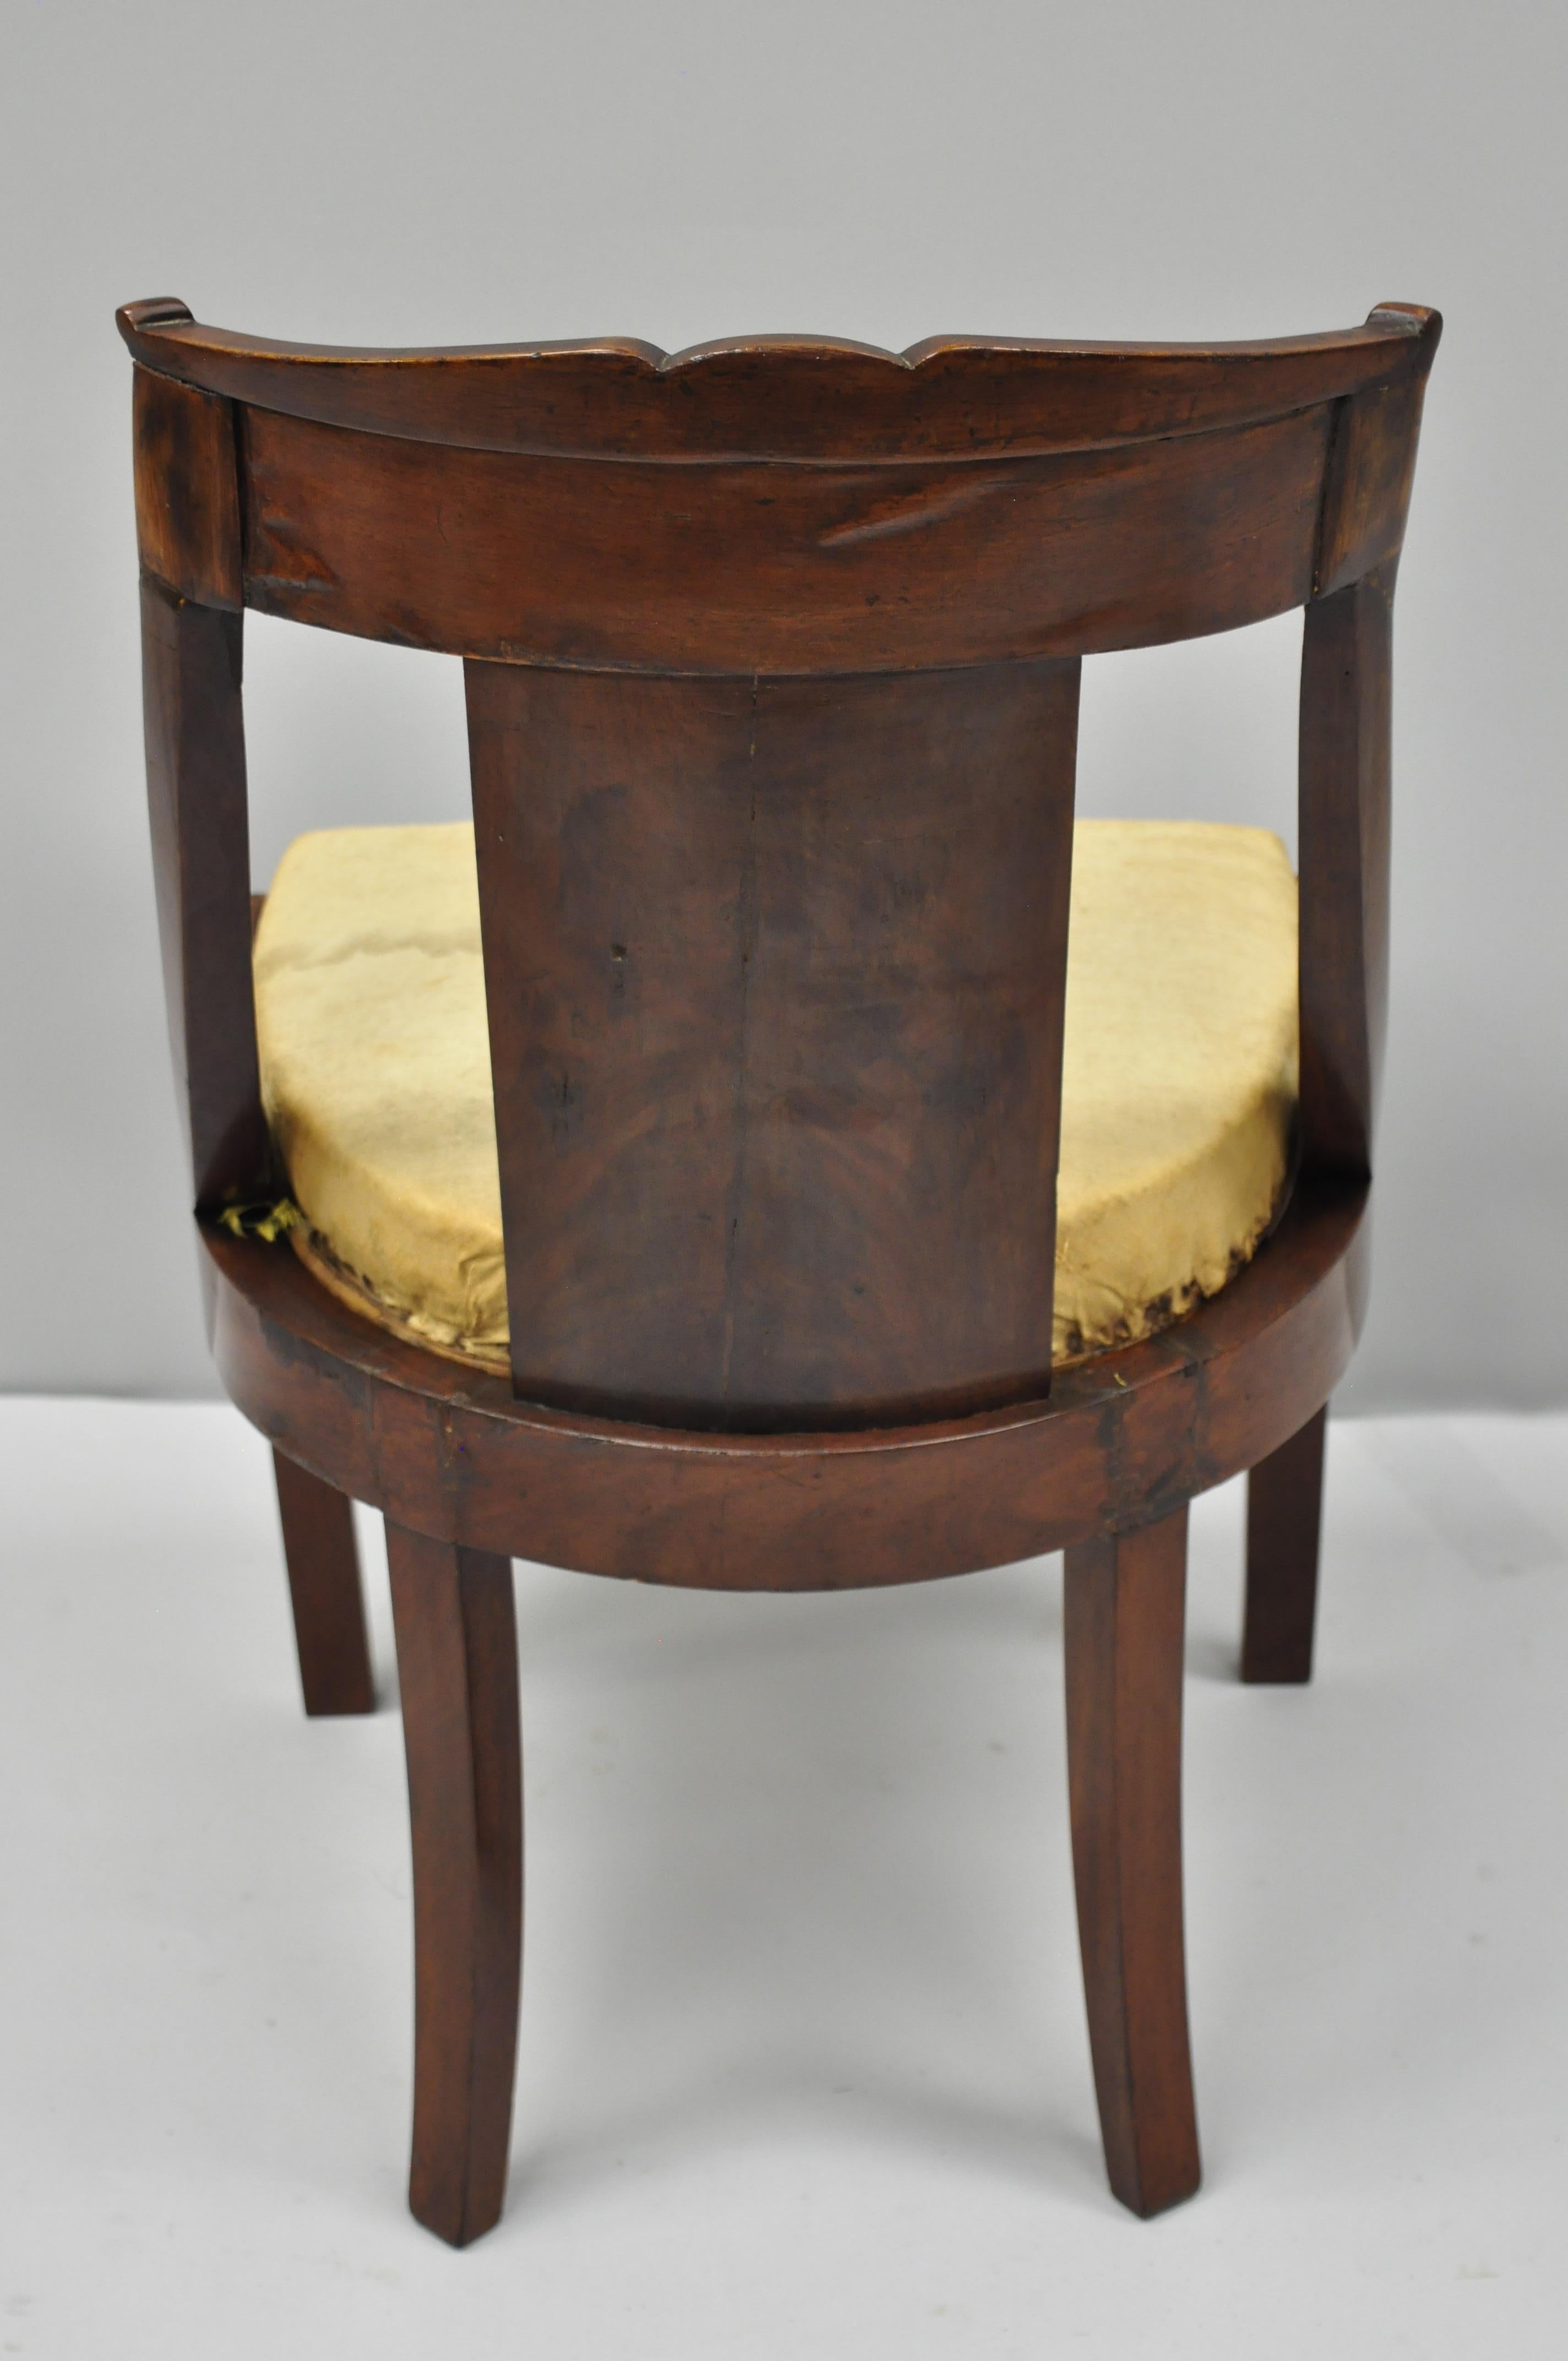 Early 19th Century French Empire Regency Mahogany Side Chair with Bronze Ormolu For Sale 10